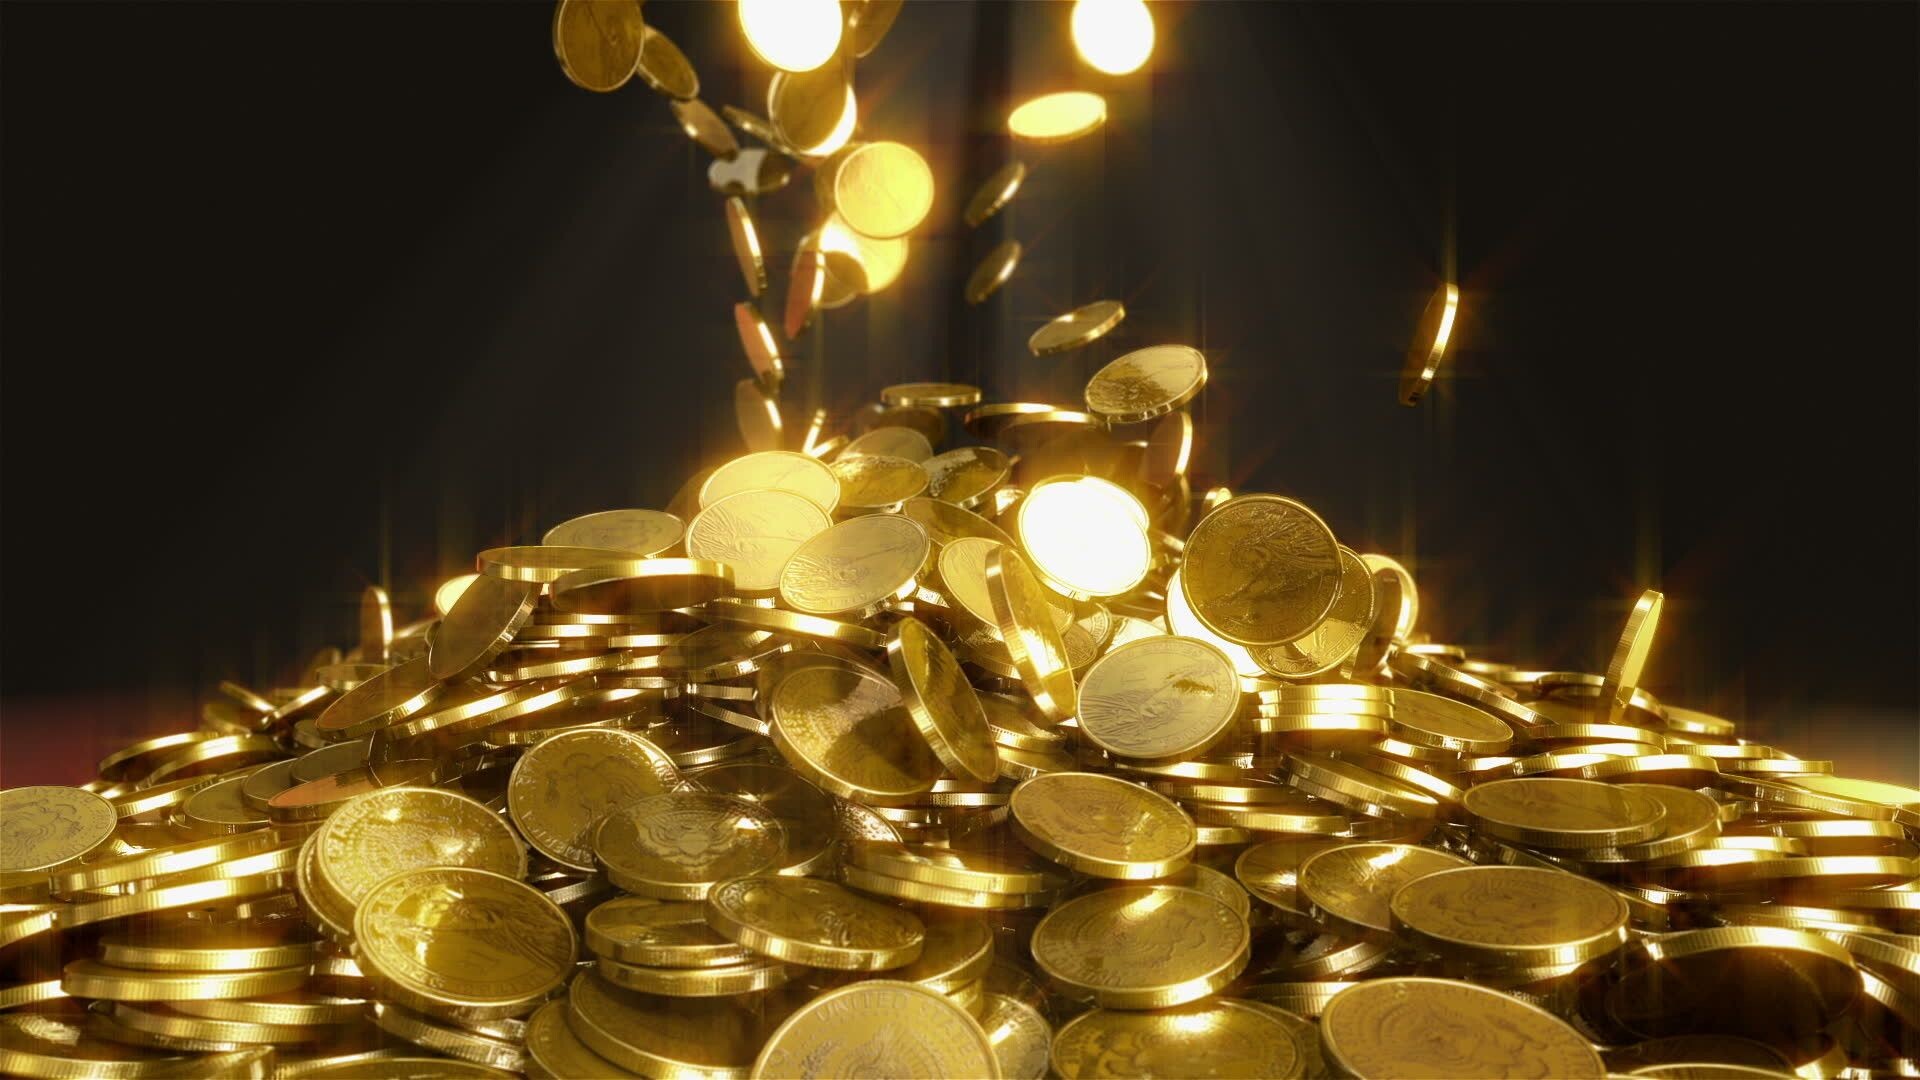 Gold Coins: Scattering of coins made of yellow metal, Numismatic value, Precious metal. 1920x1080 Full HD Wallpaper.